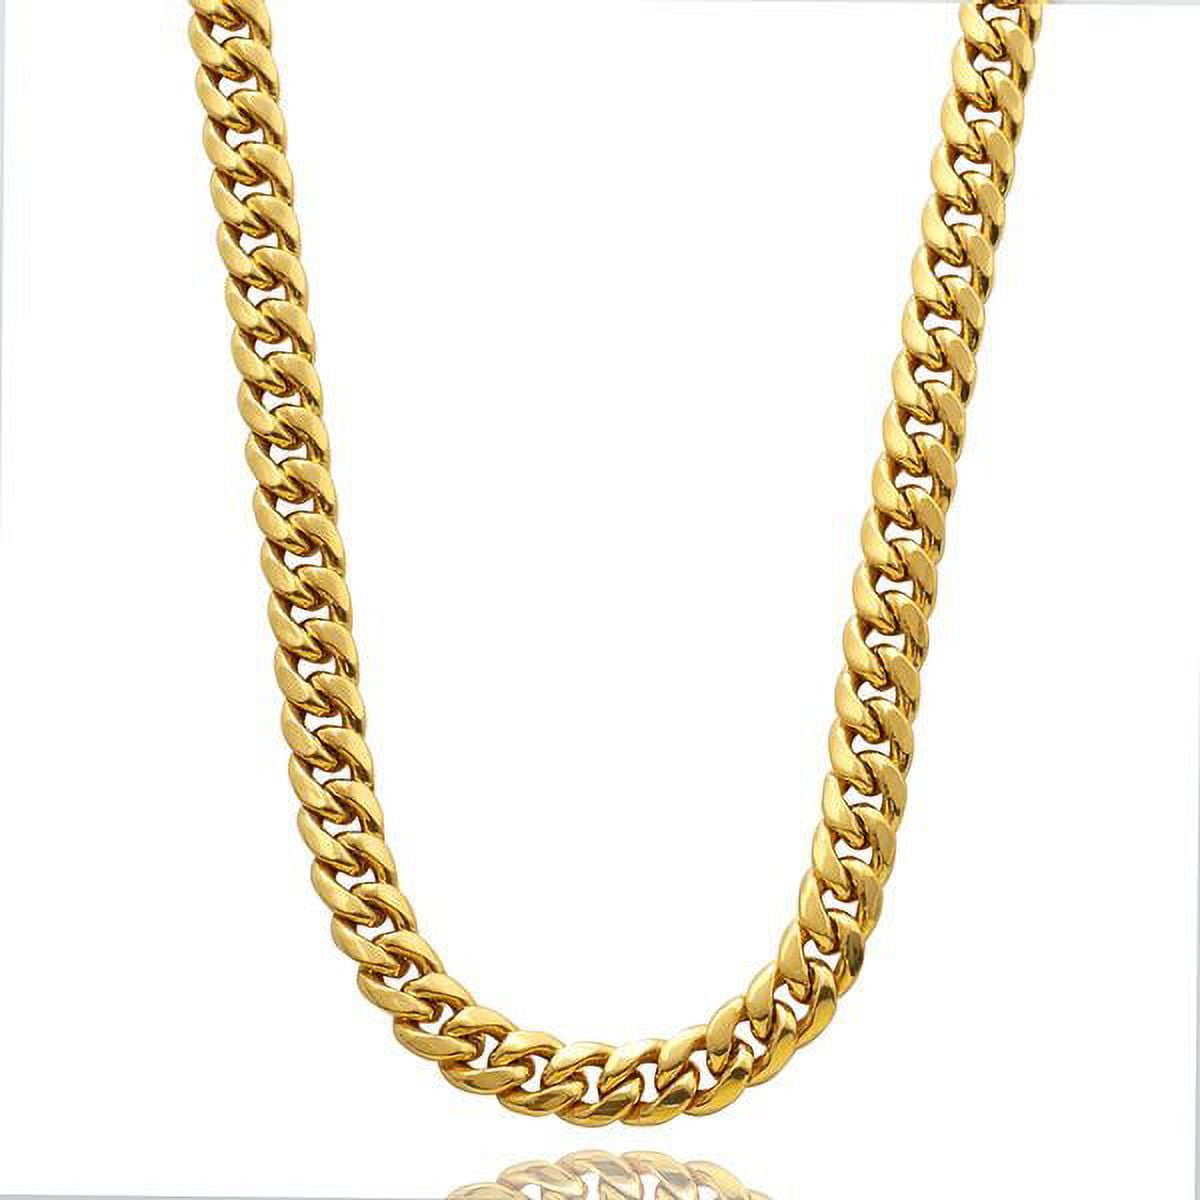 10K Yellow Gold 6mm Hollow Miami Cuban Chain Necklace with Lobster Lock ...